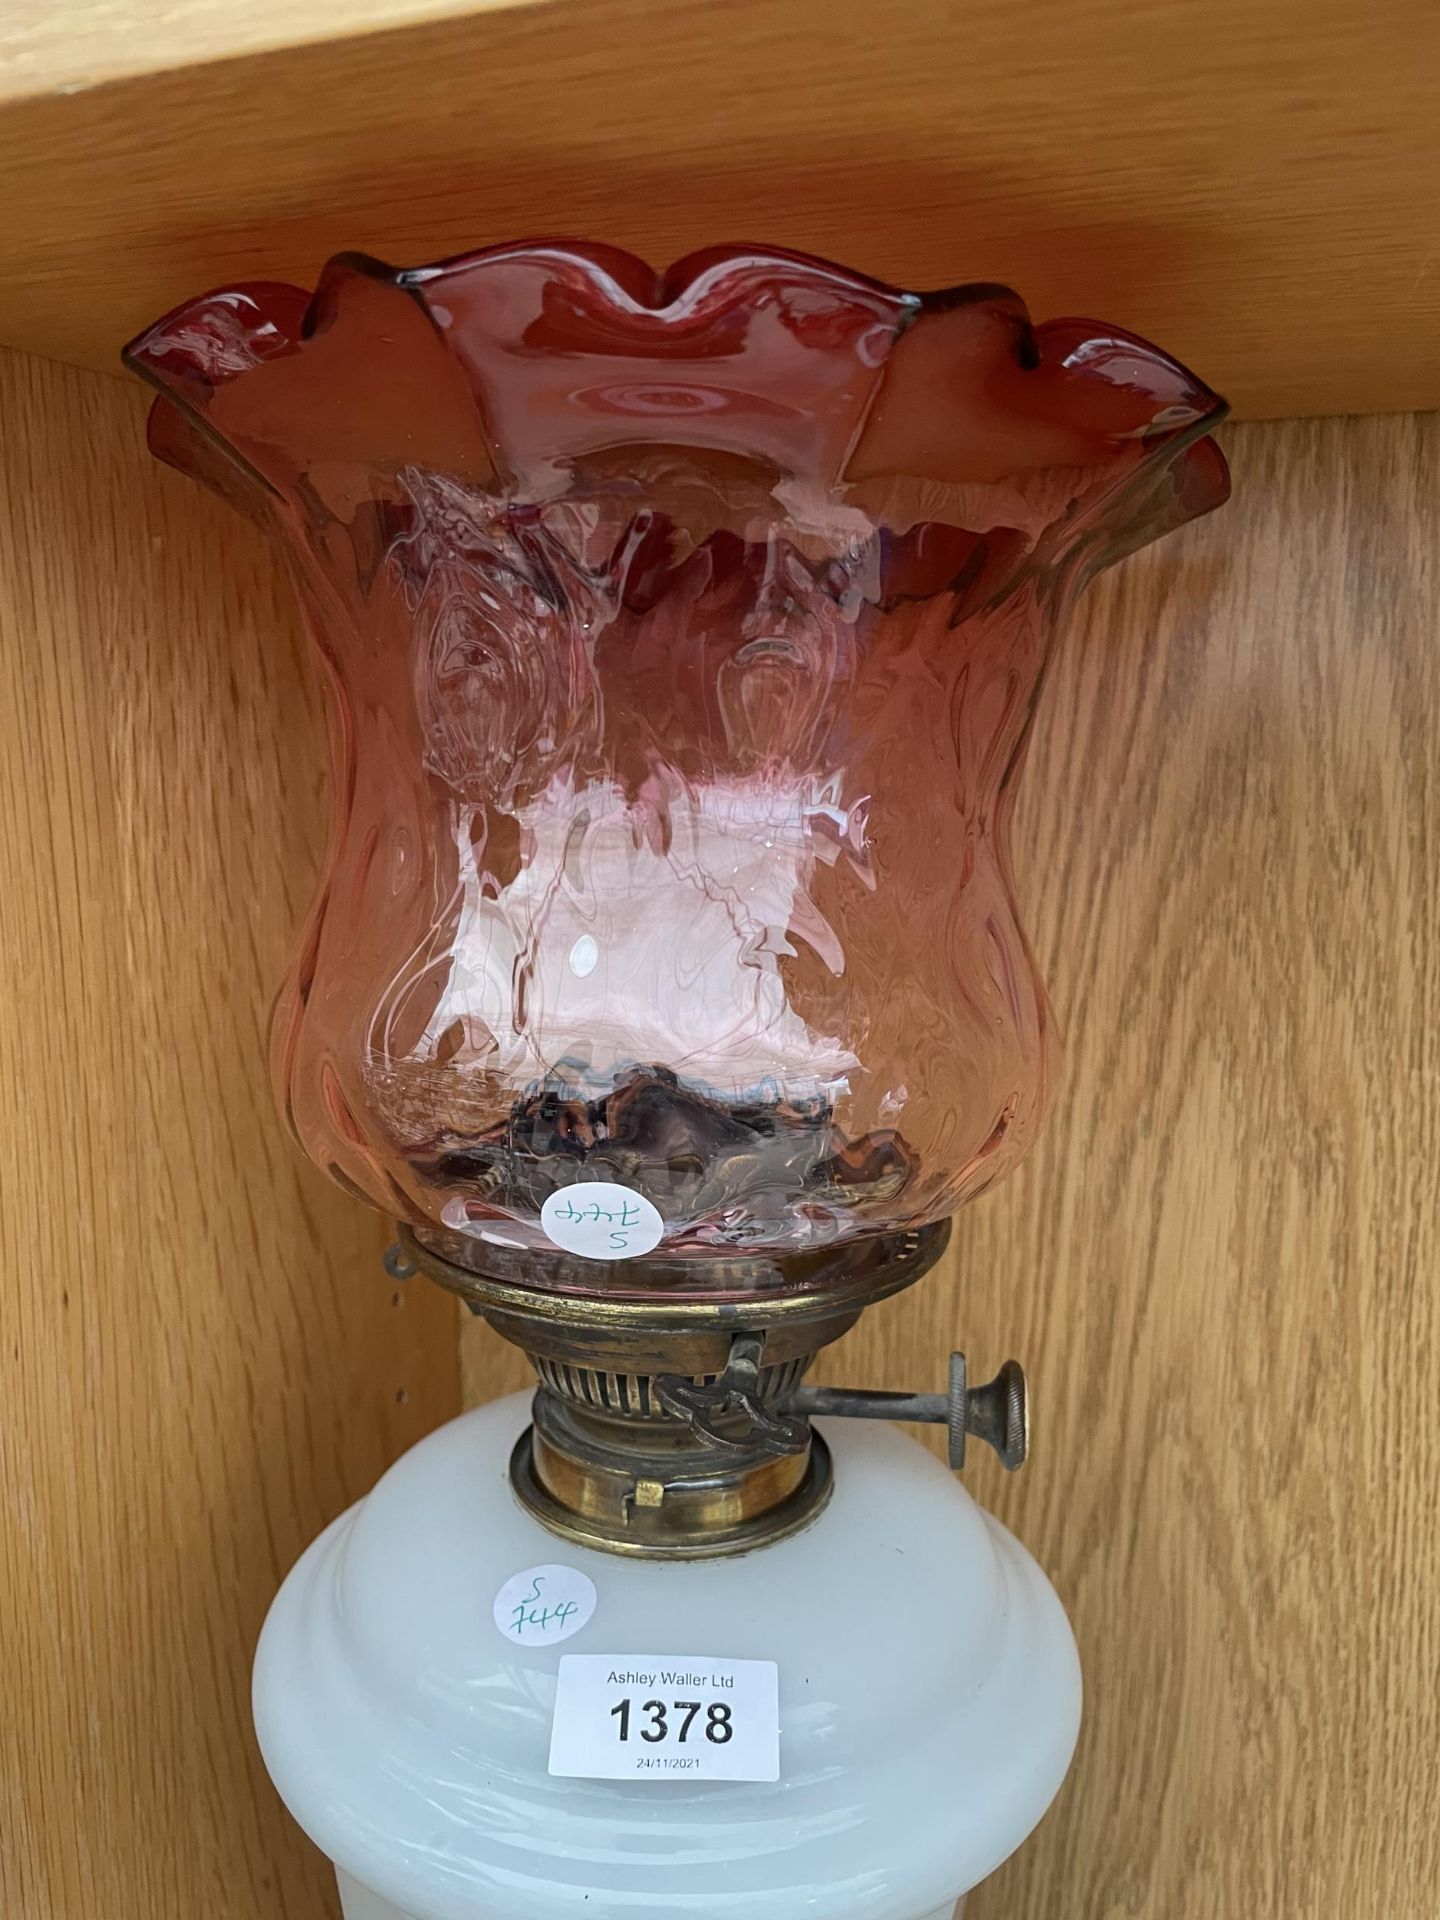 A LARGE GLASS OIL LAMP WITH RED GLASS SHADE - Image 3 of 3